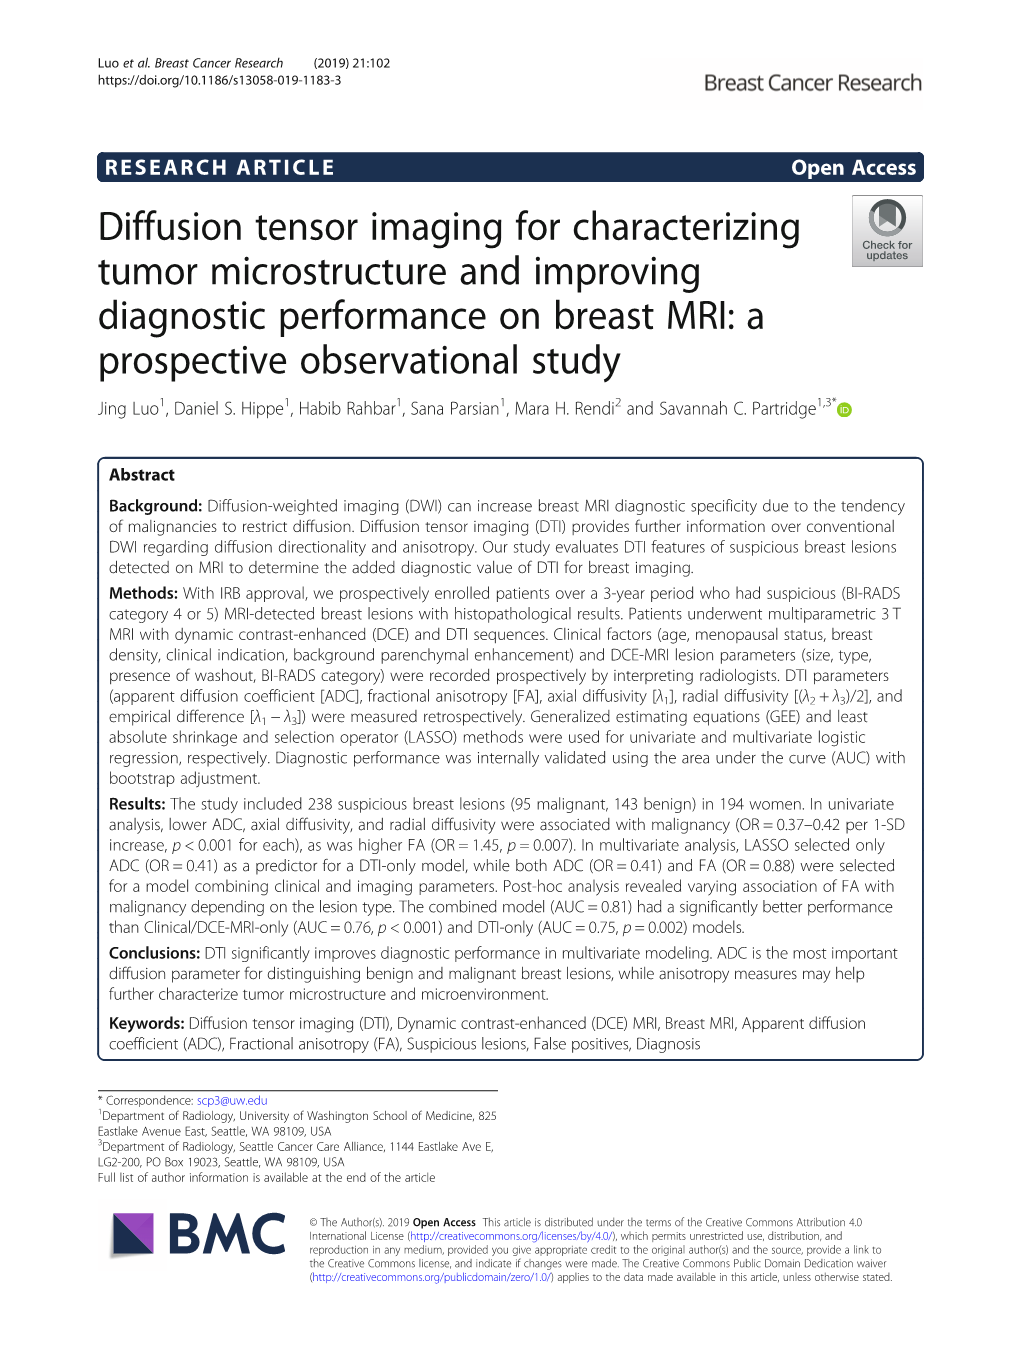 Diffusion Tensor Imaging for Characterizing Tumor Microstructure